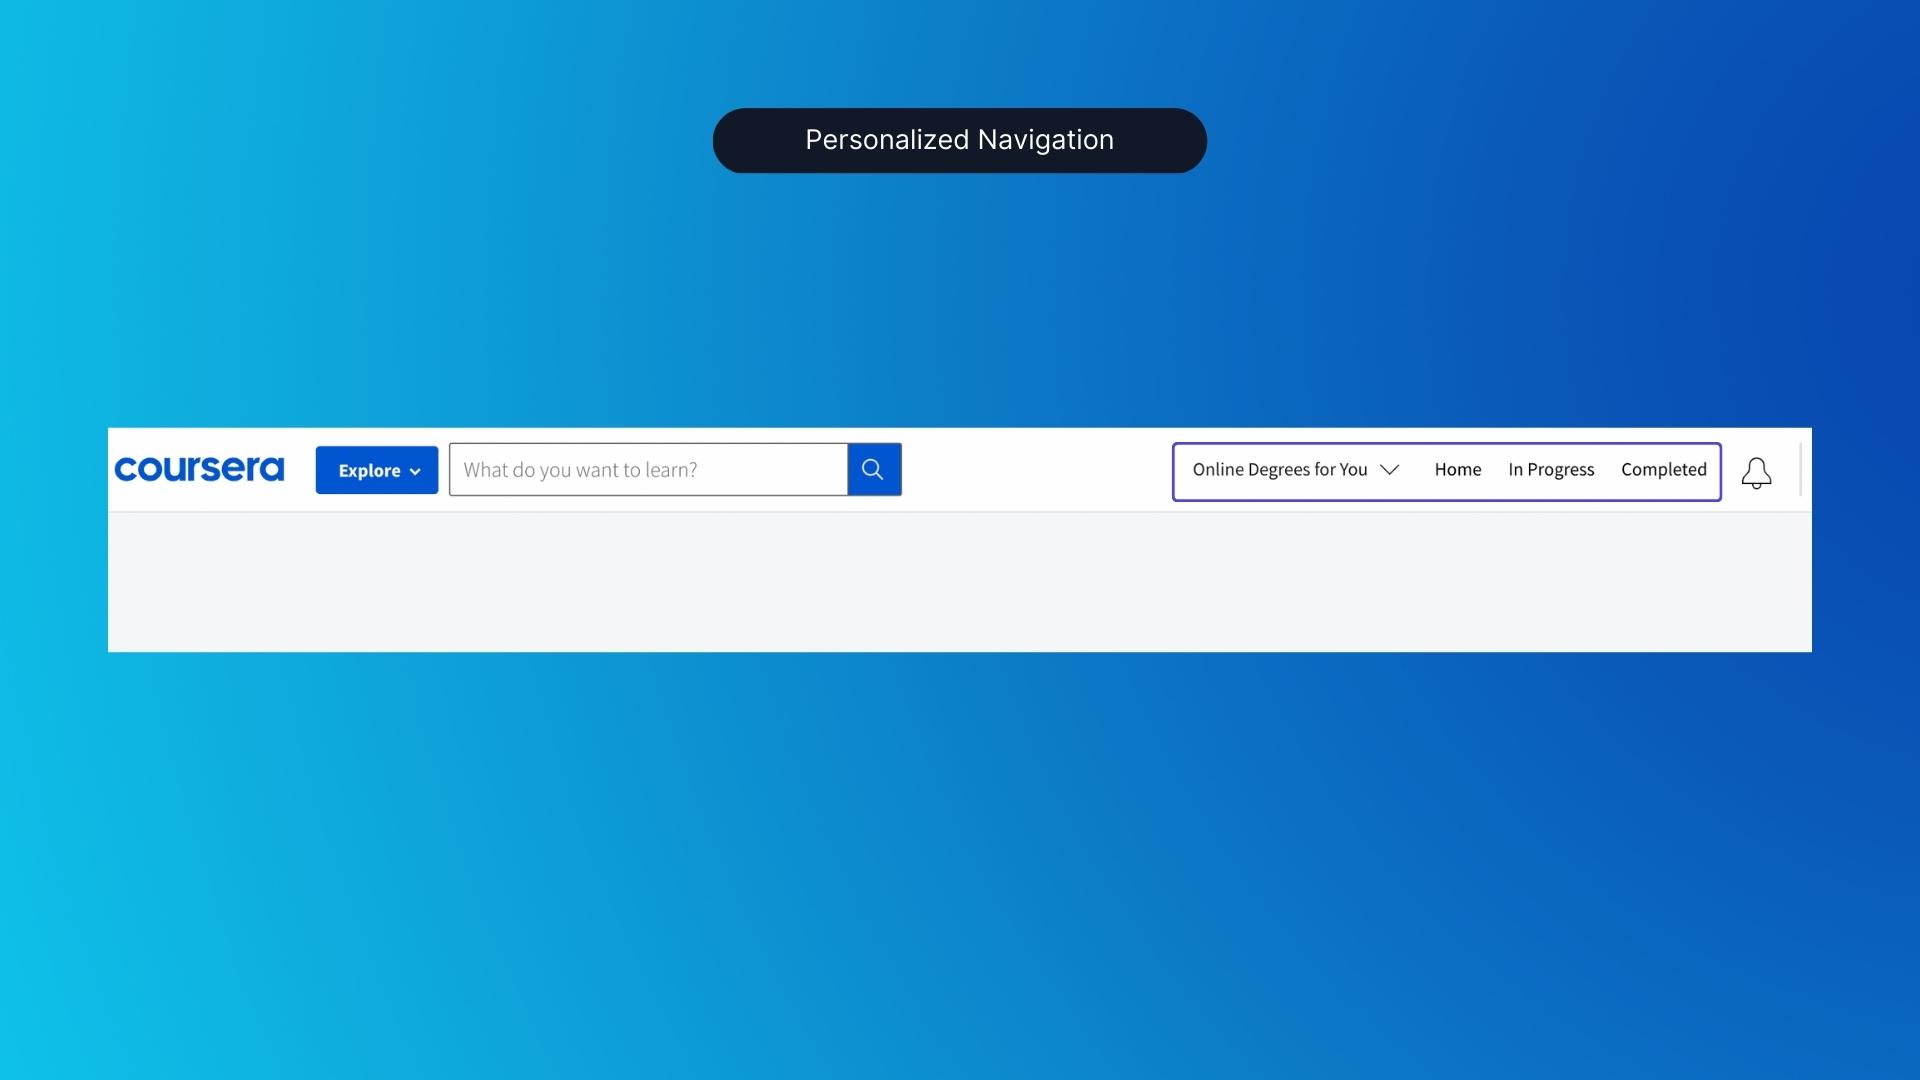 Navigation Personalization Example (Coursera) - After